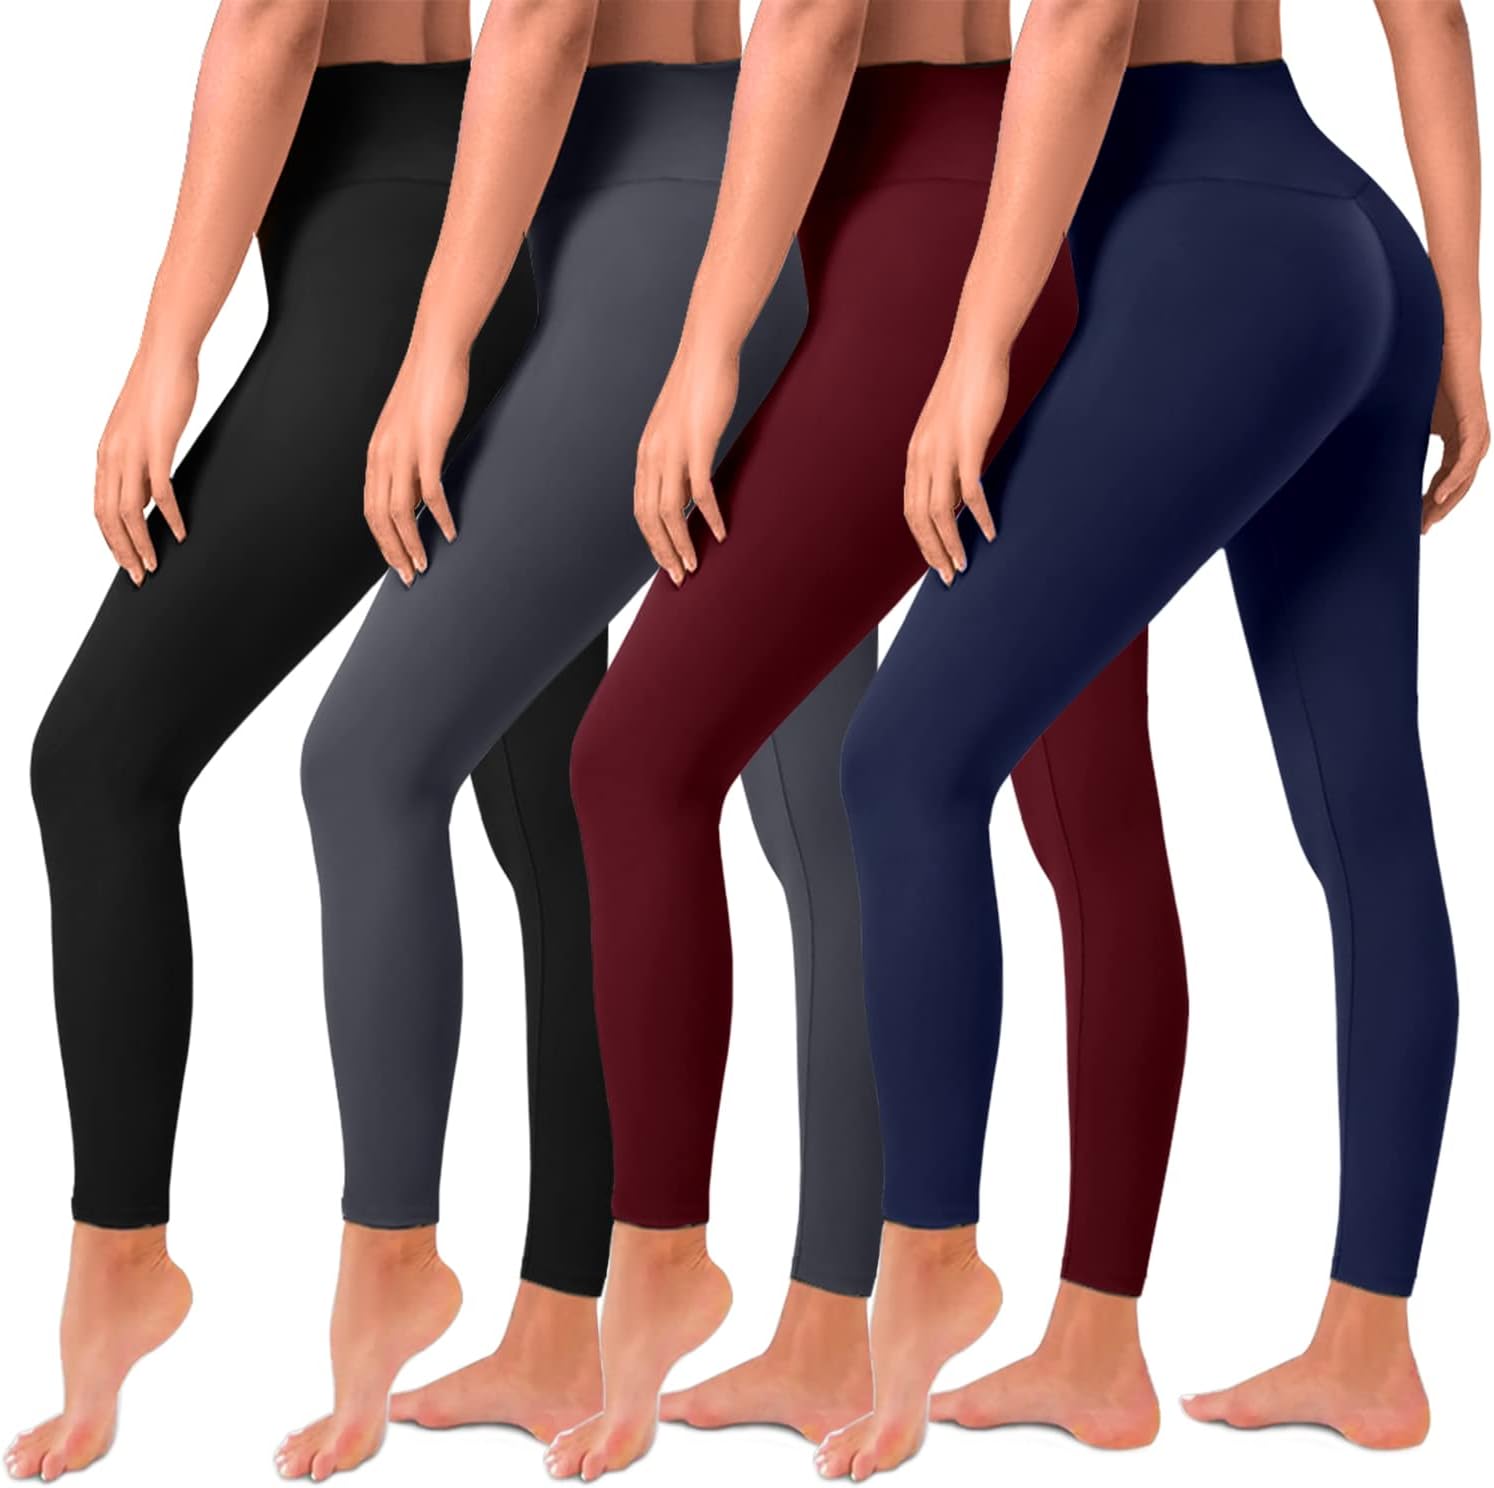 4 Pack Leggings for Women Butt Lift High Waisted Tummy Control Slimming Black No See-Thru Yoga Pants Workout Running